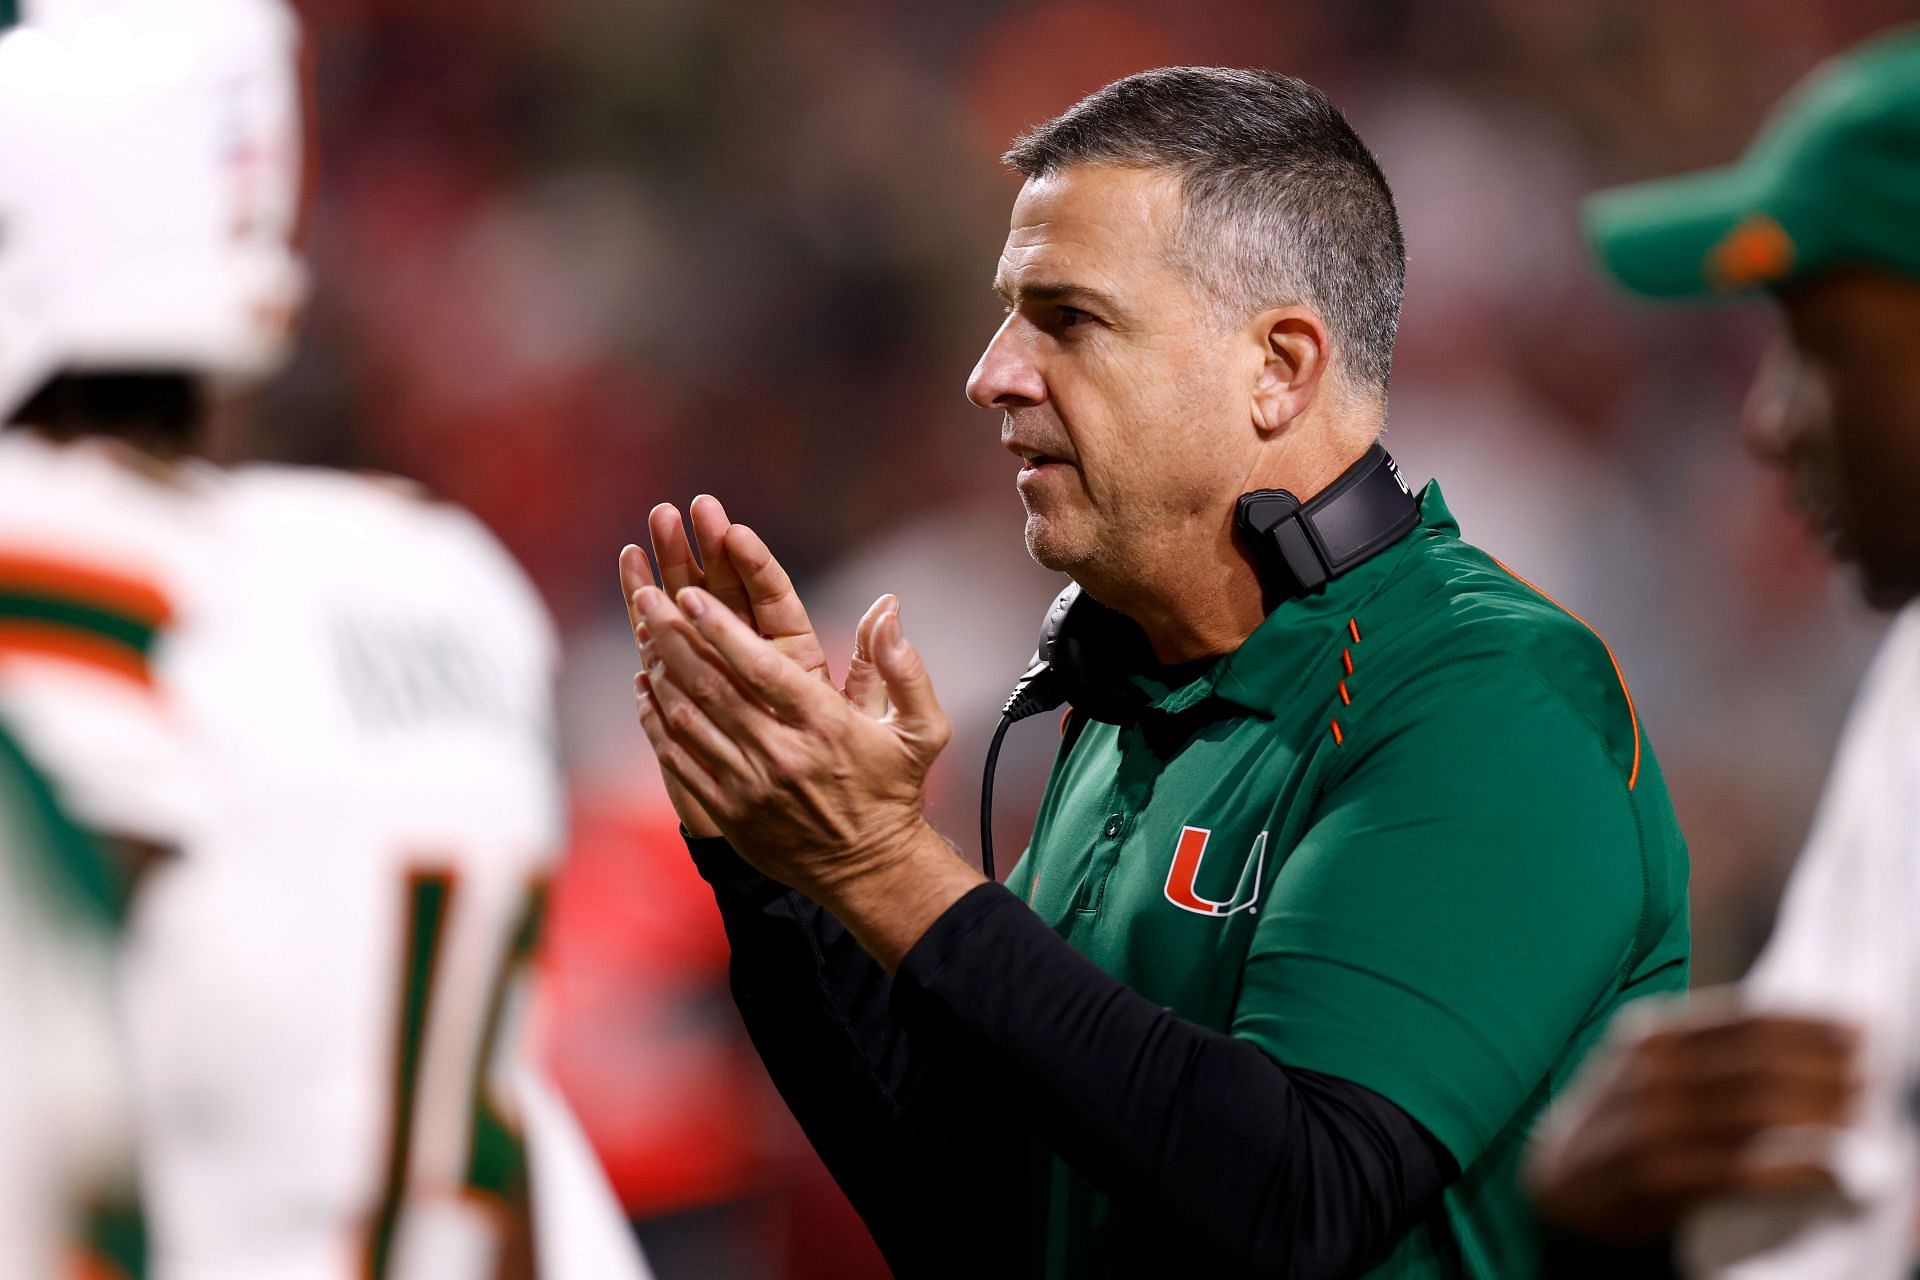 Miami and coach Mario Cristobal are one of the favorites to win the Damien Martinez transfer portal battle.